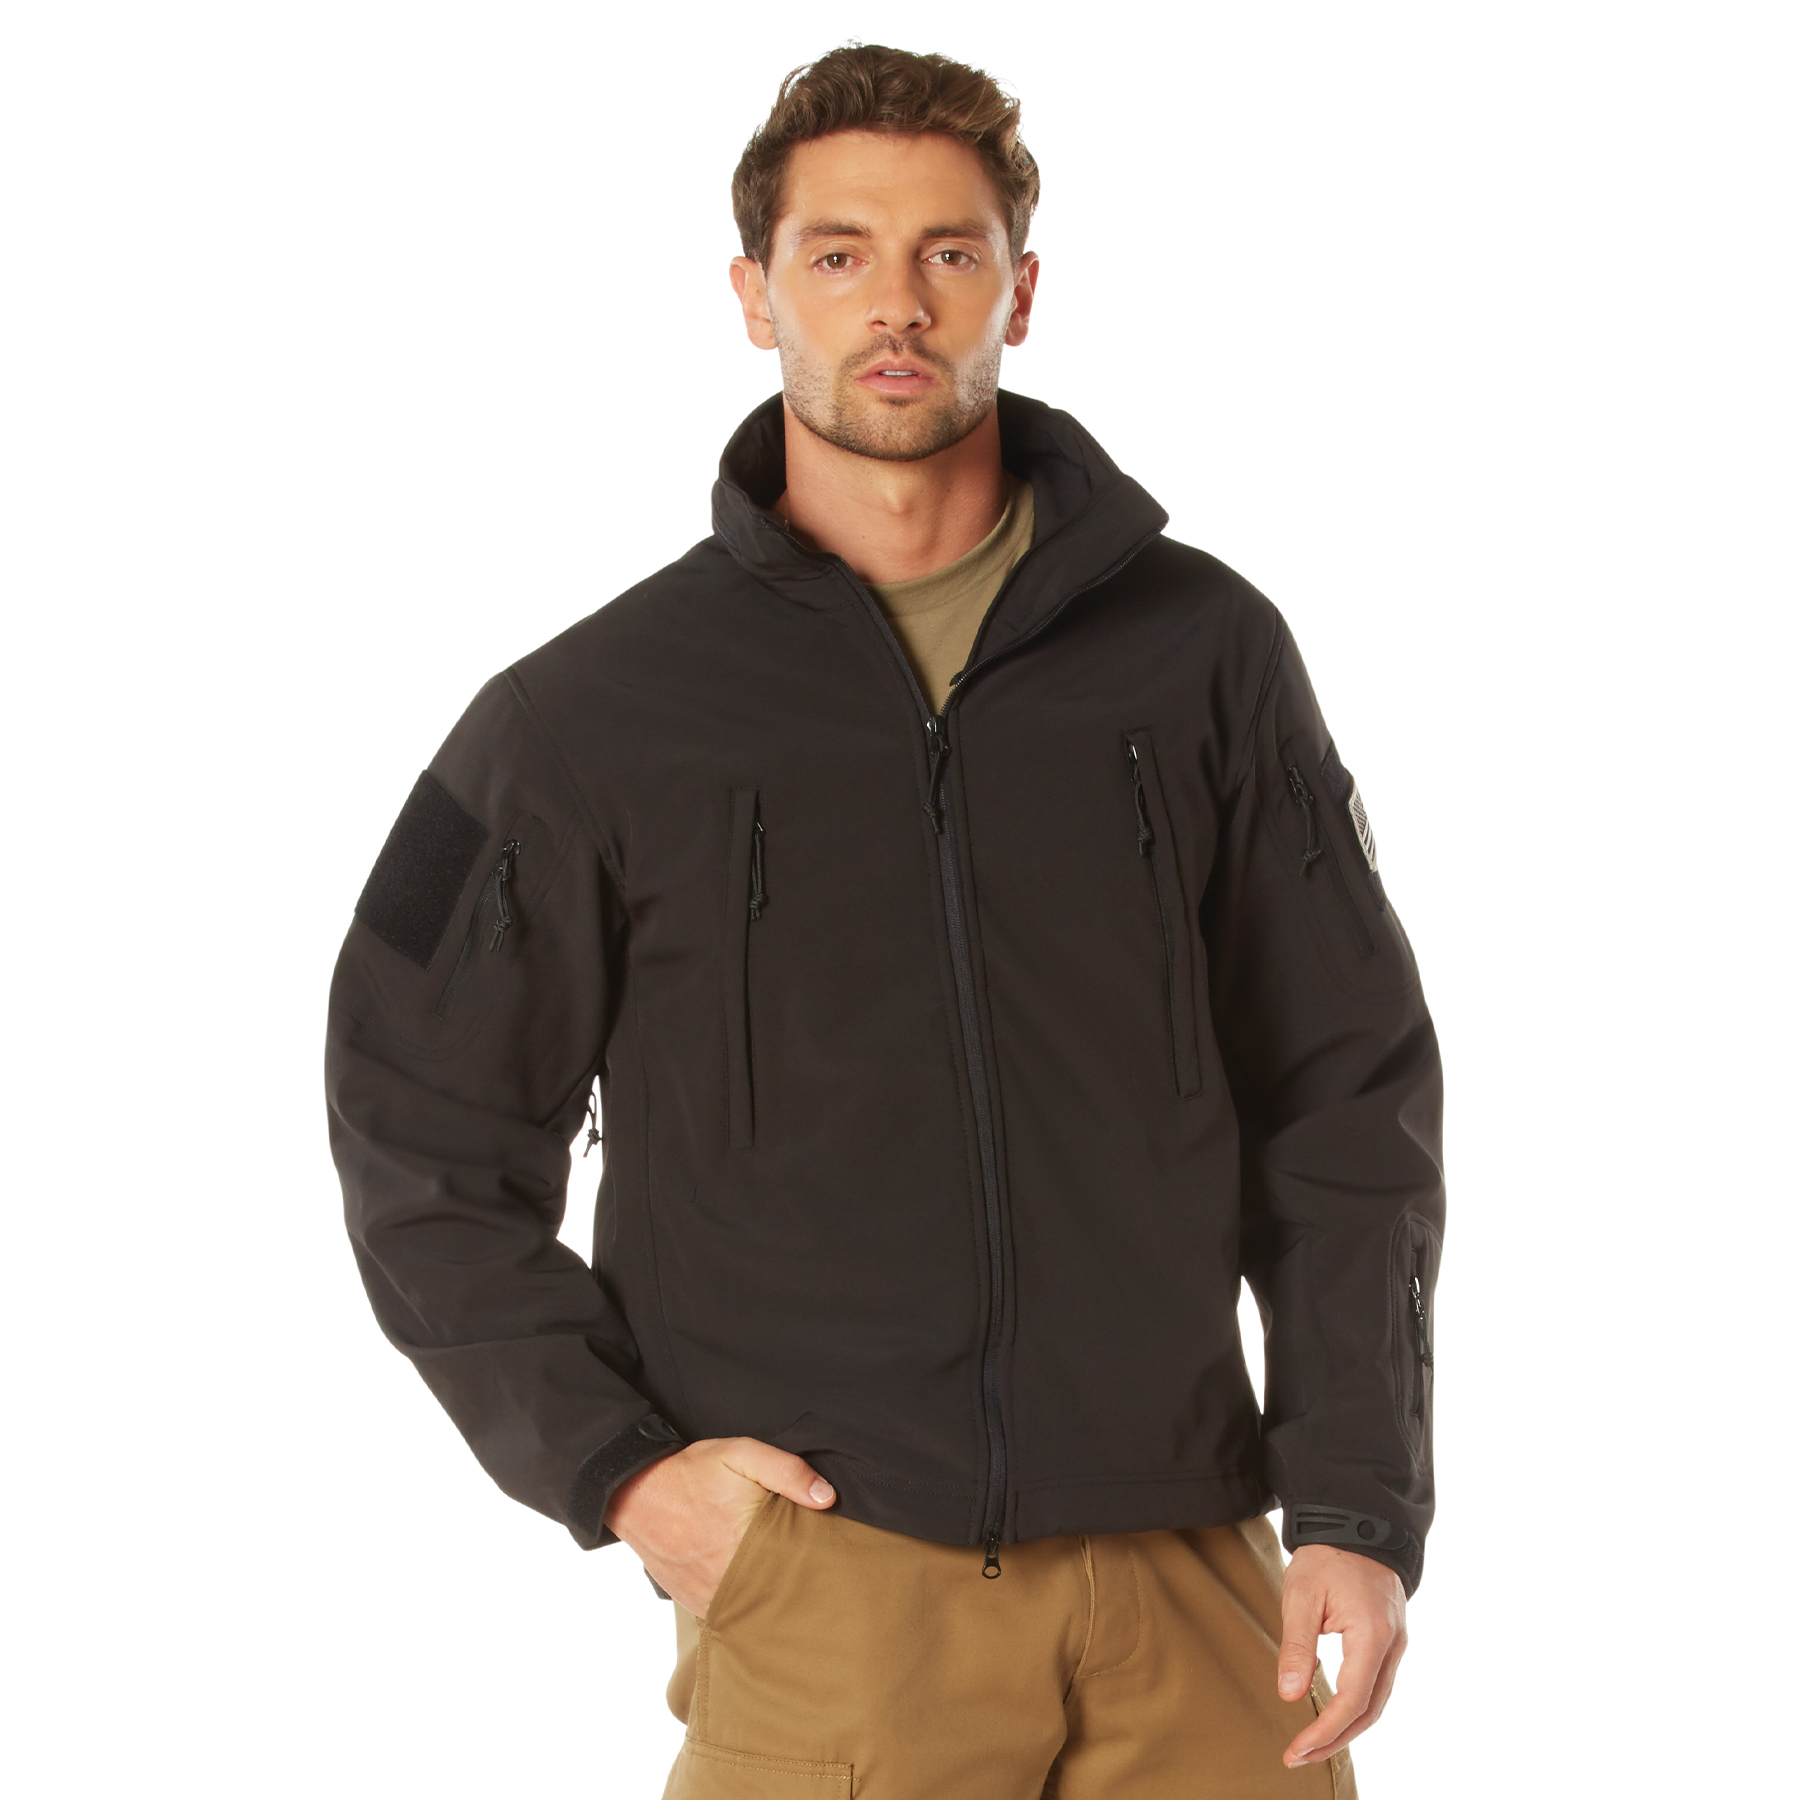 Rothco 3-in-1 Spec Ops Soft Shell Jacket,Coyote Brown